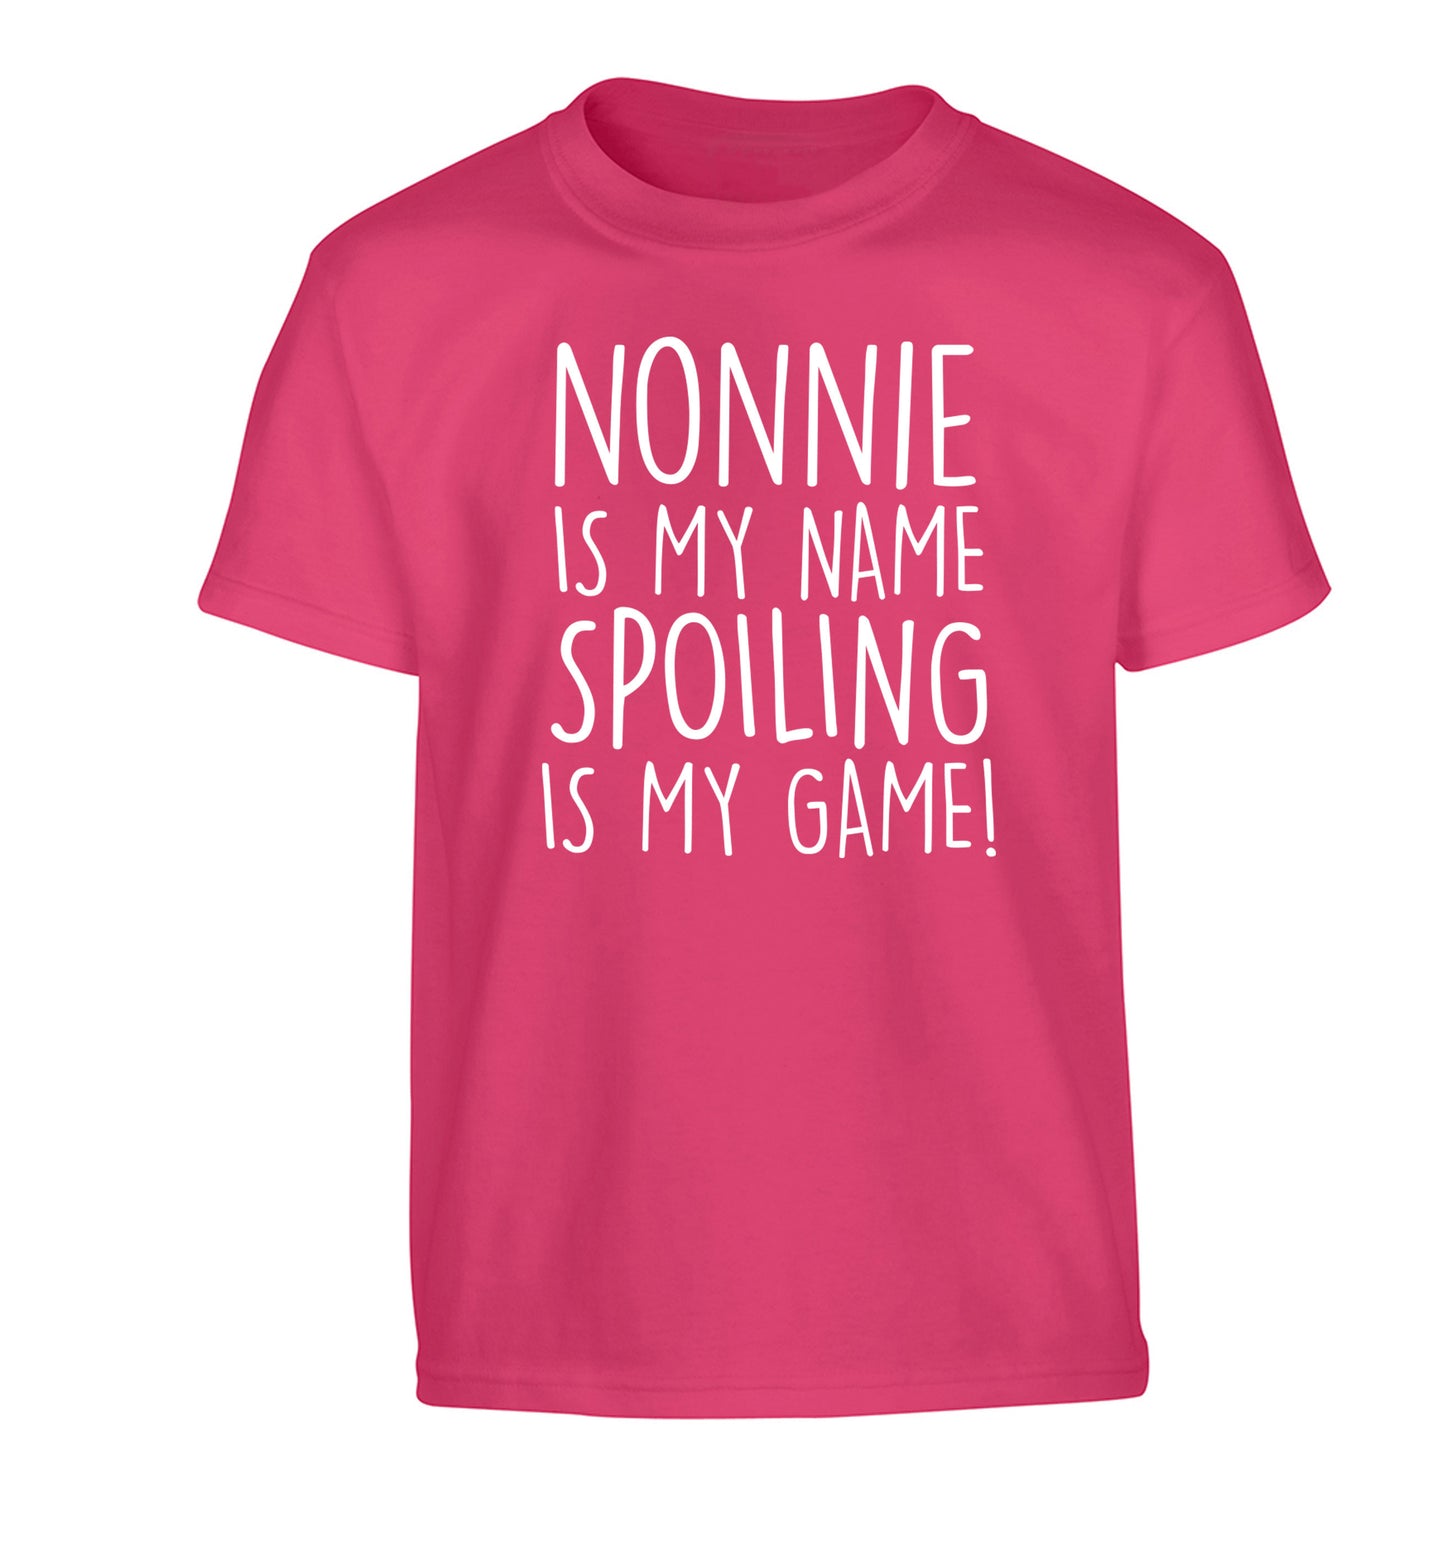 Nonnie is my name, spoiling is my game Children's pink Tshirt 12-14 Years